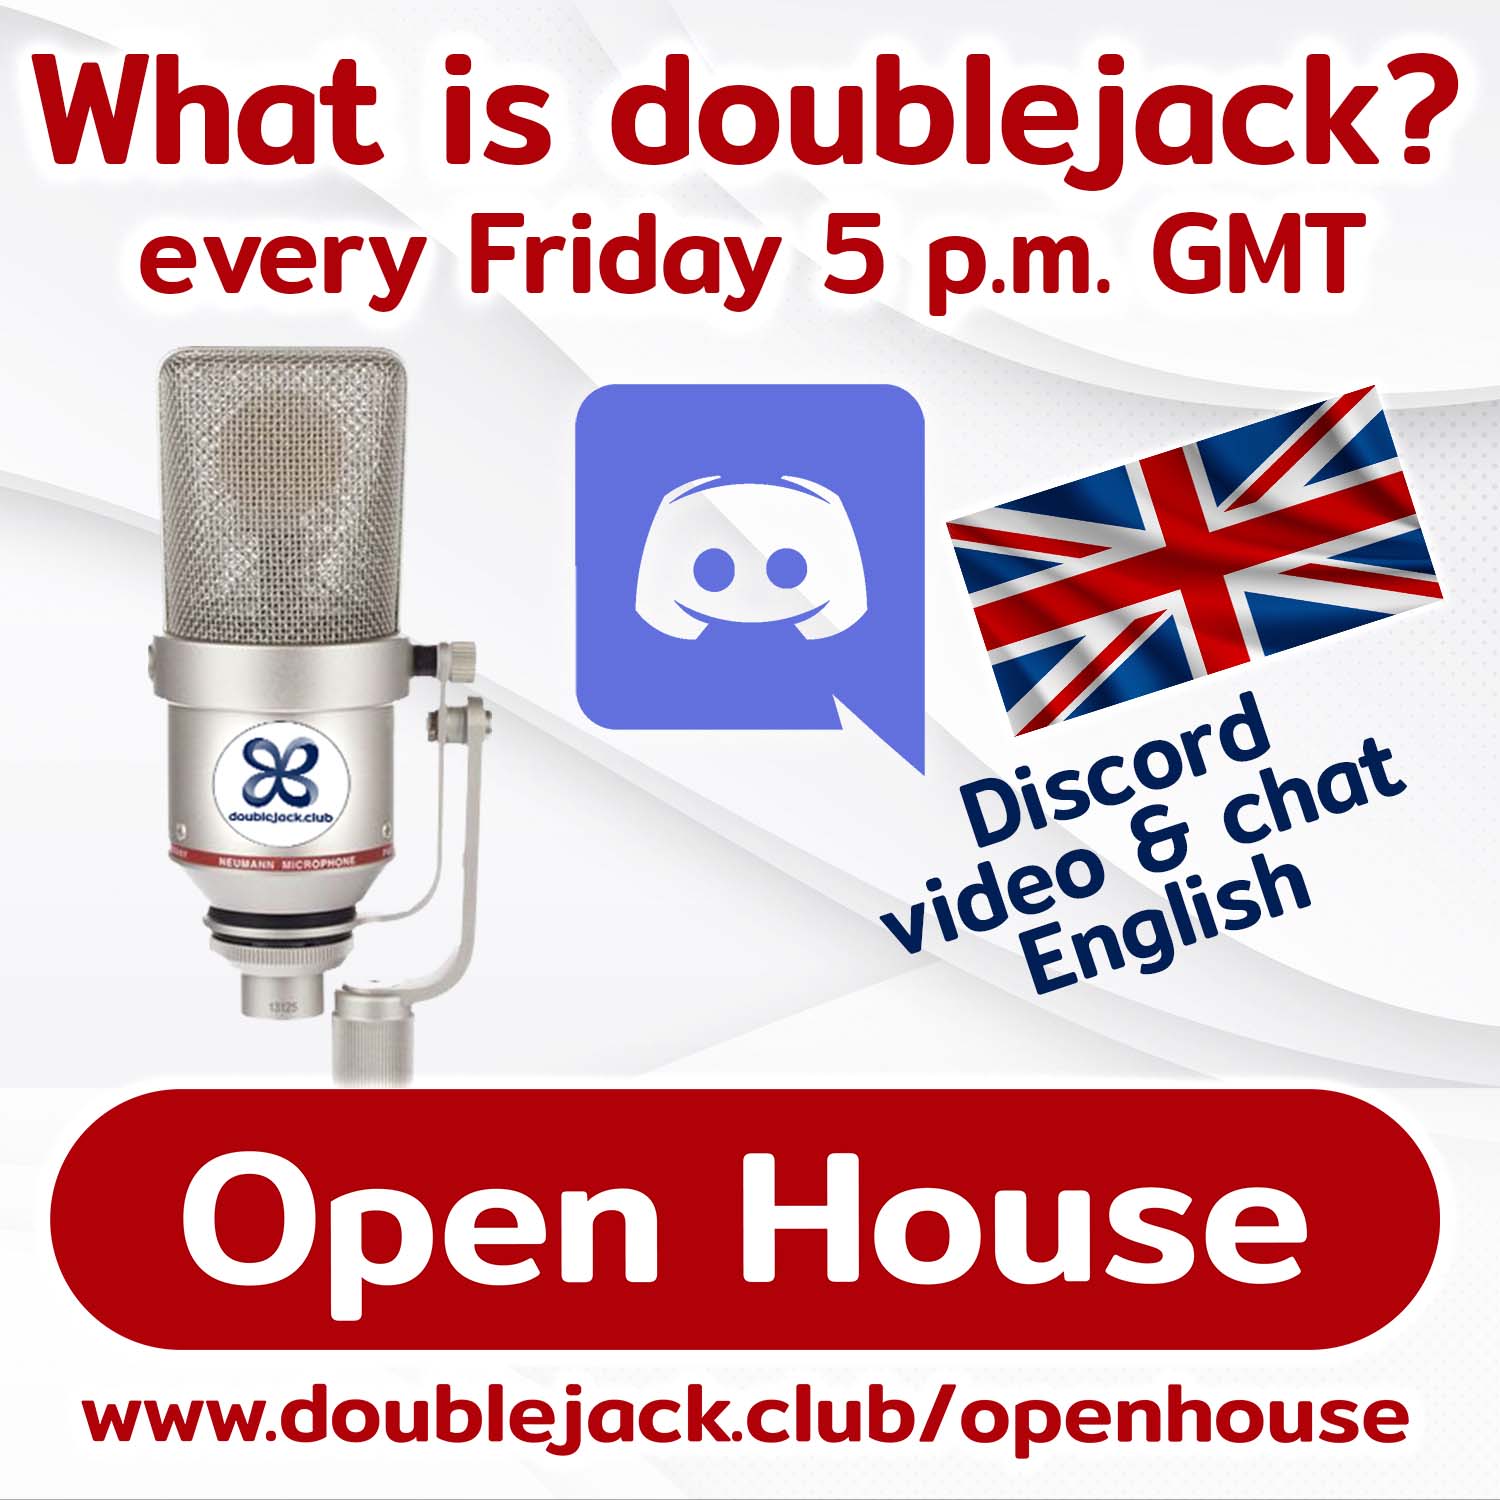 Open House on Discord - meet the doublejack experts